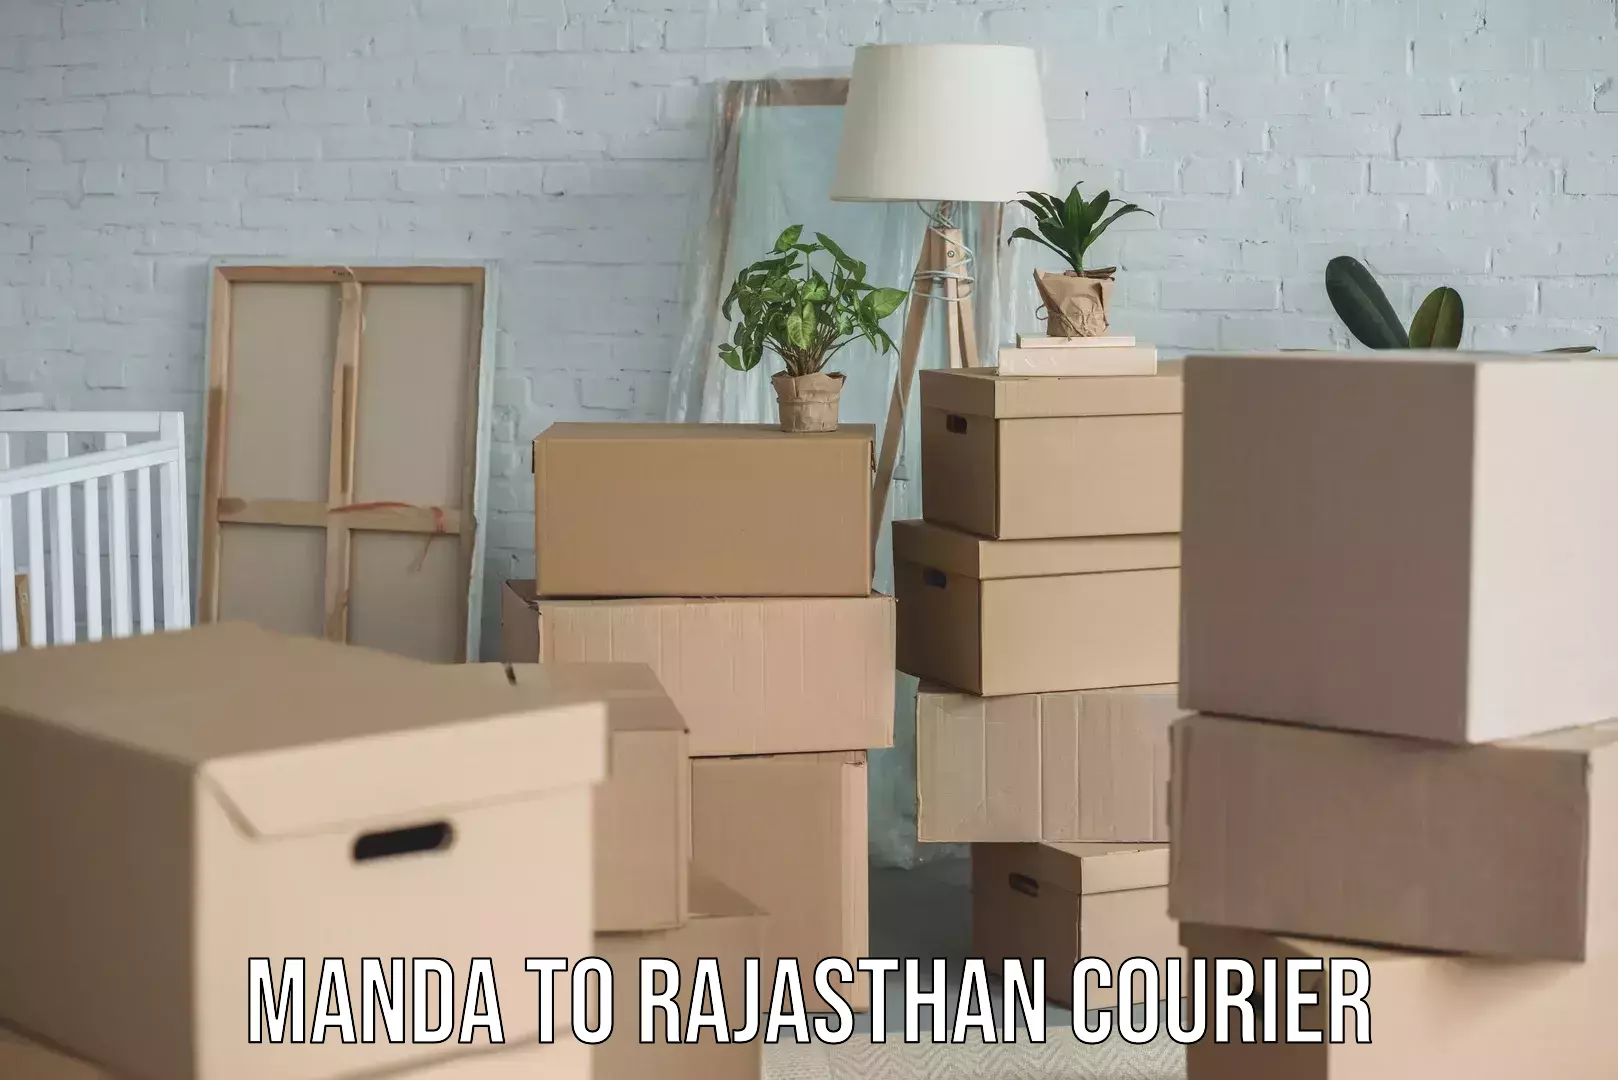 Full-service household moving in Manda to Rajasthan